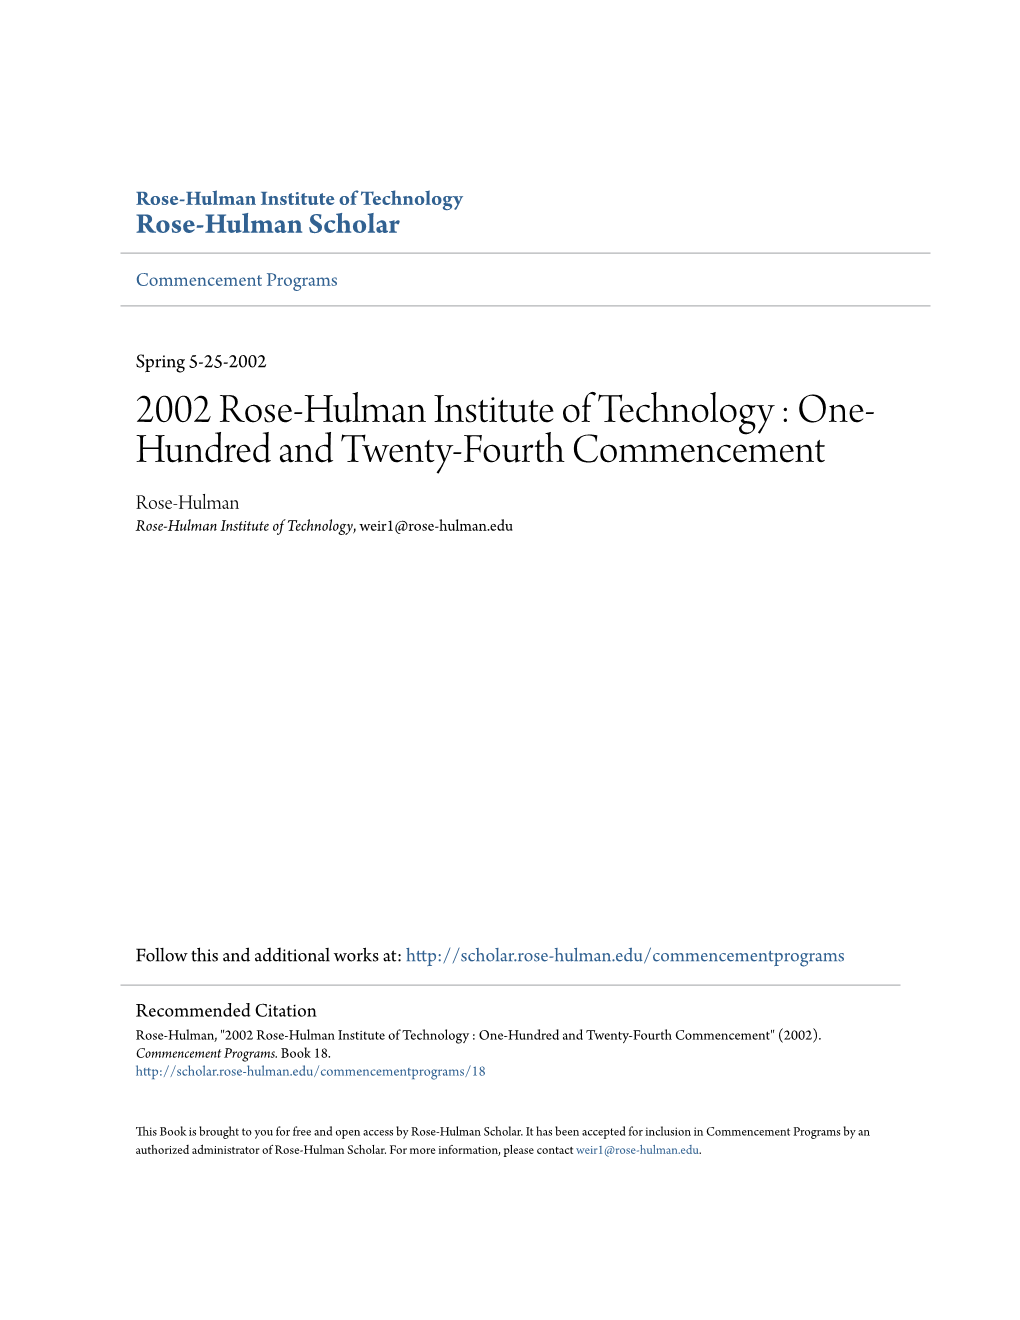 2002 Rose-Hulman Institute of Technology : One-Hundred and Twenty-Fourth Commencement" (2002)